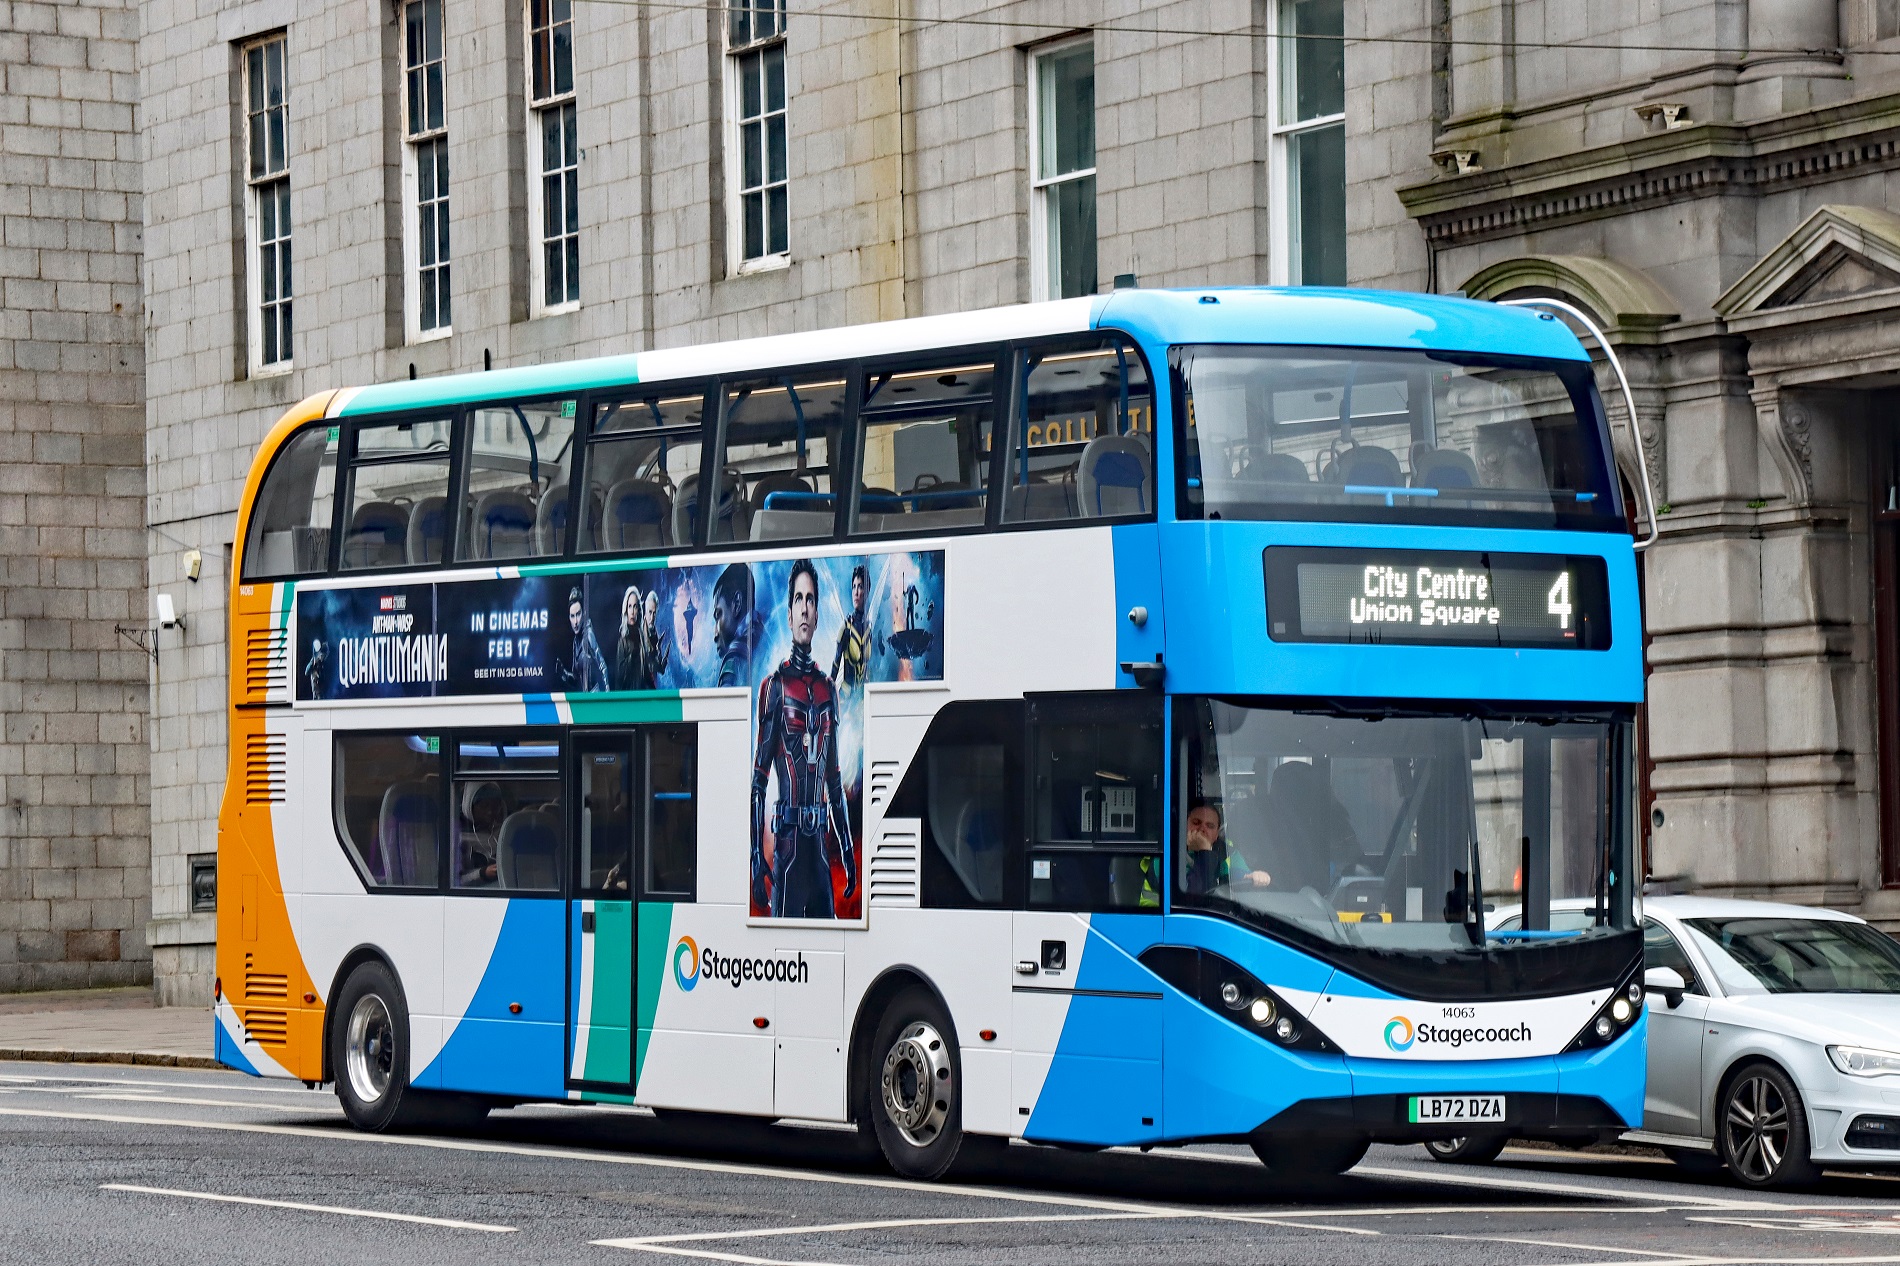 Stagecoach BYD-Alexander Dennis electric bus delivery complete